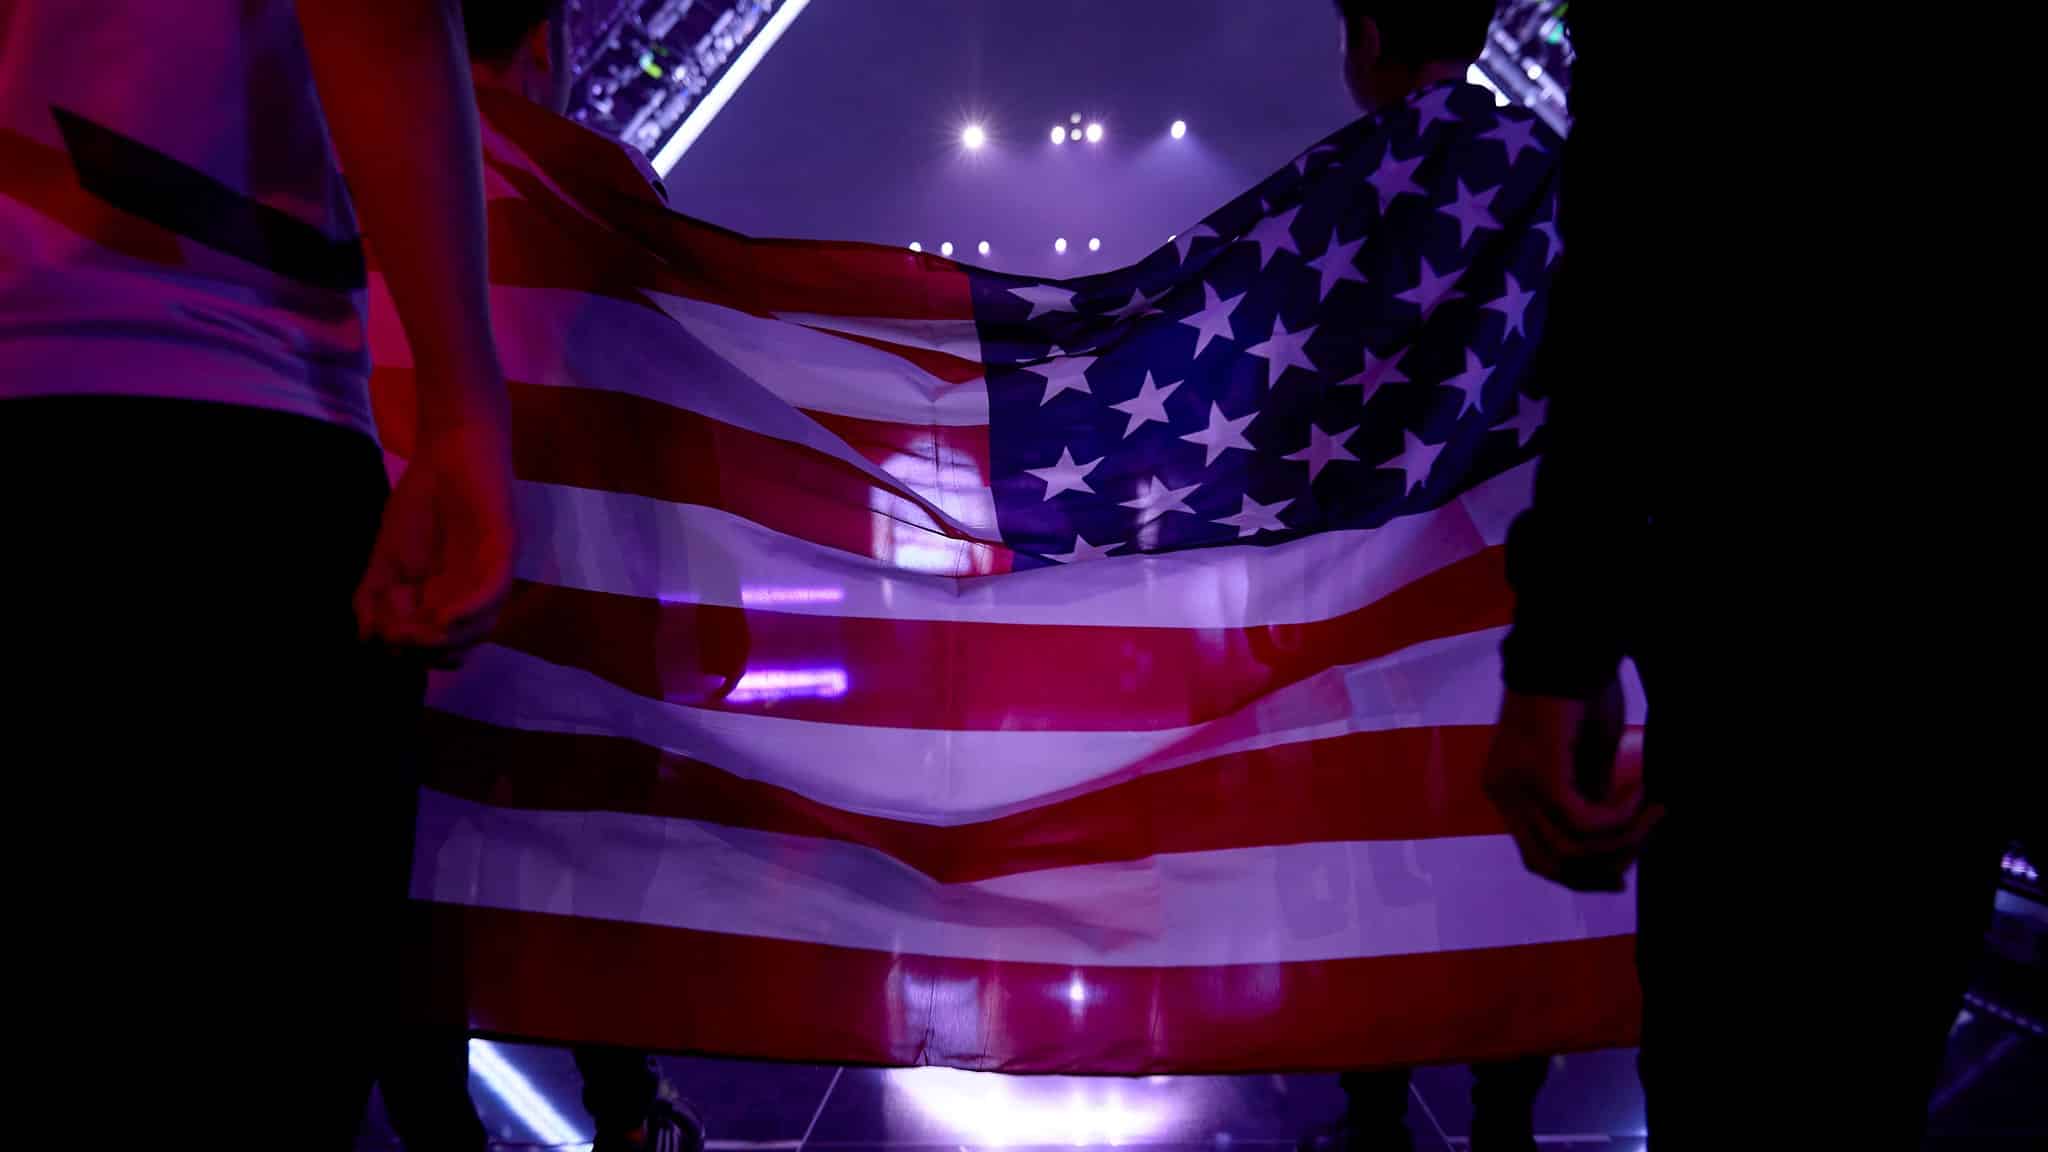 The United States flag held between two players before going on stage.